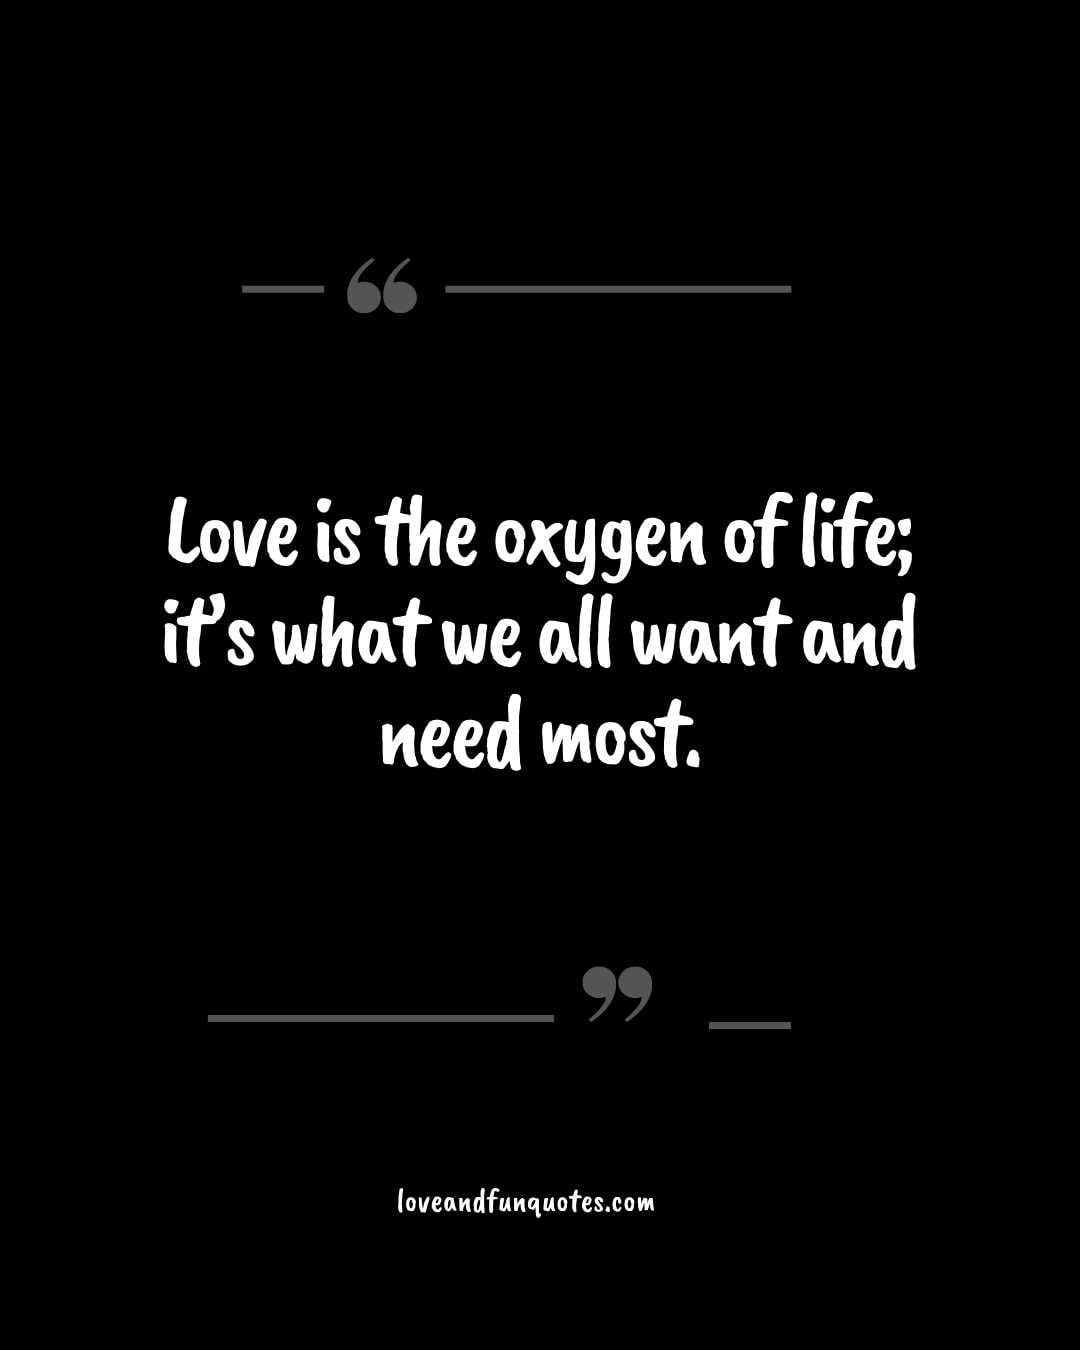 Love is the oxygen of life; it’s what we all want and need most.